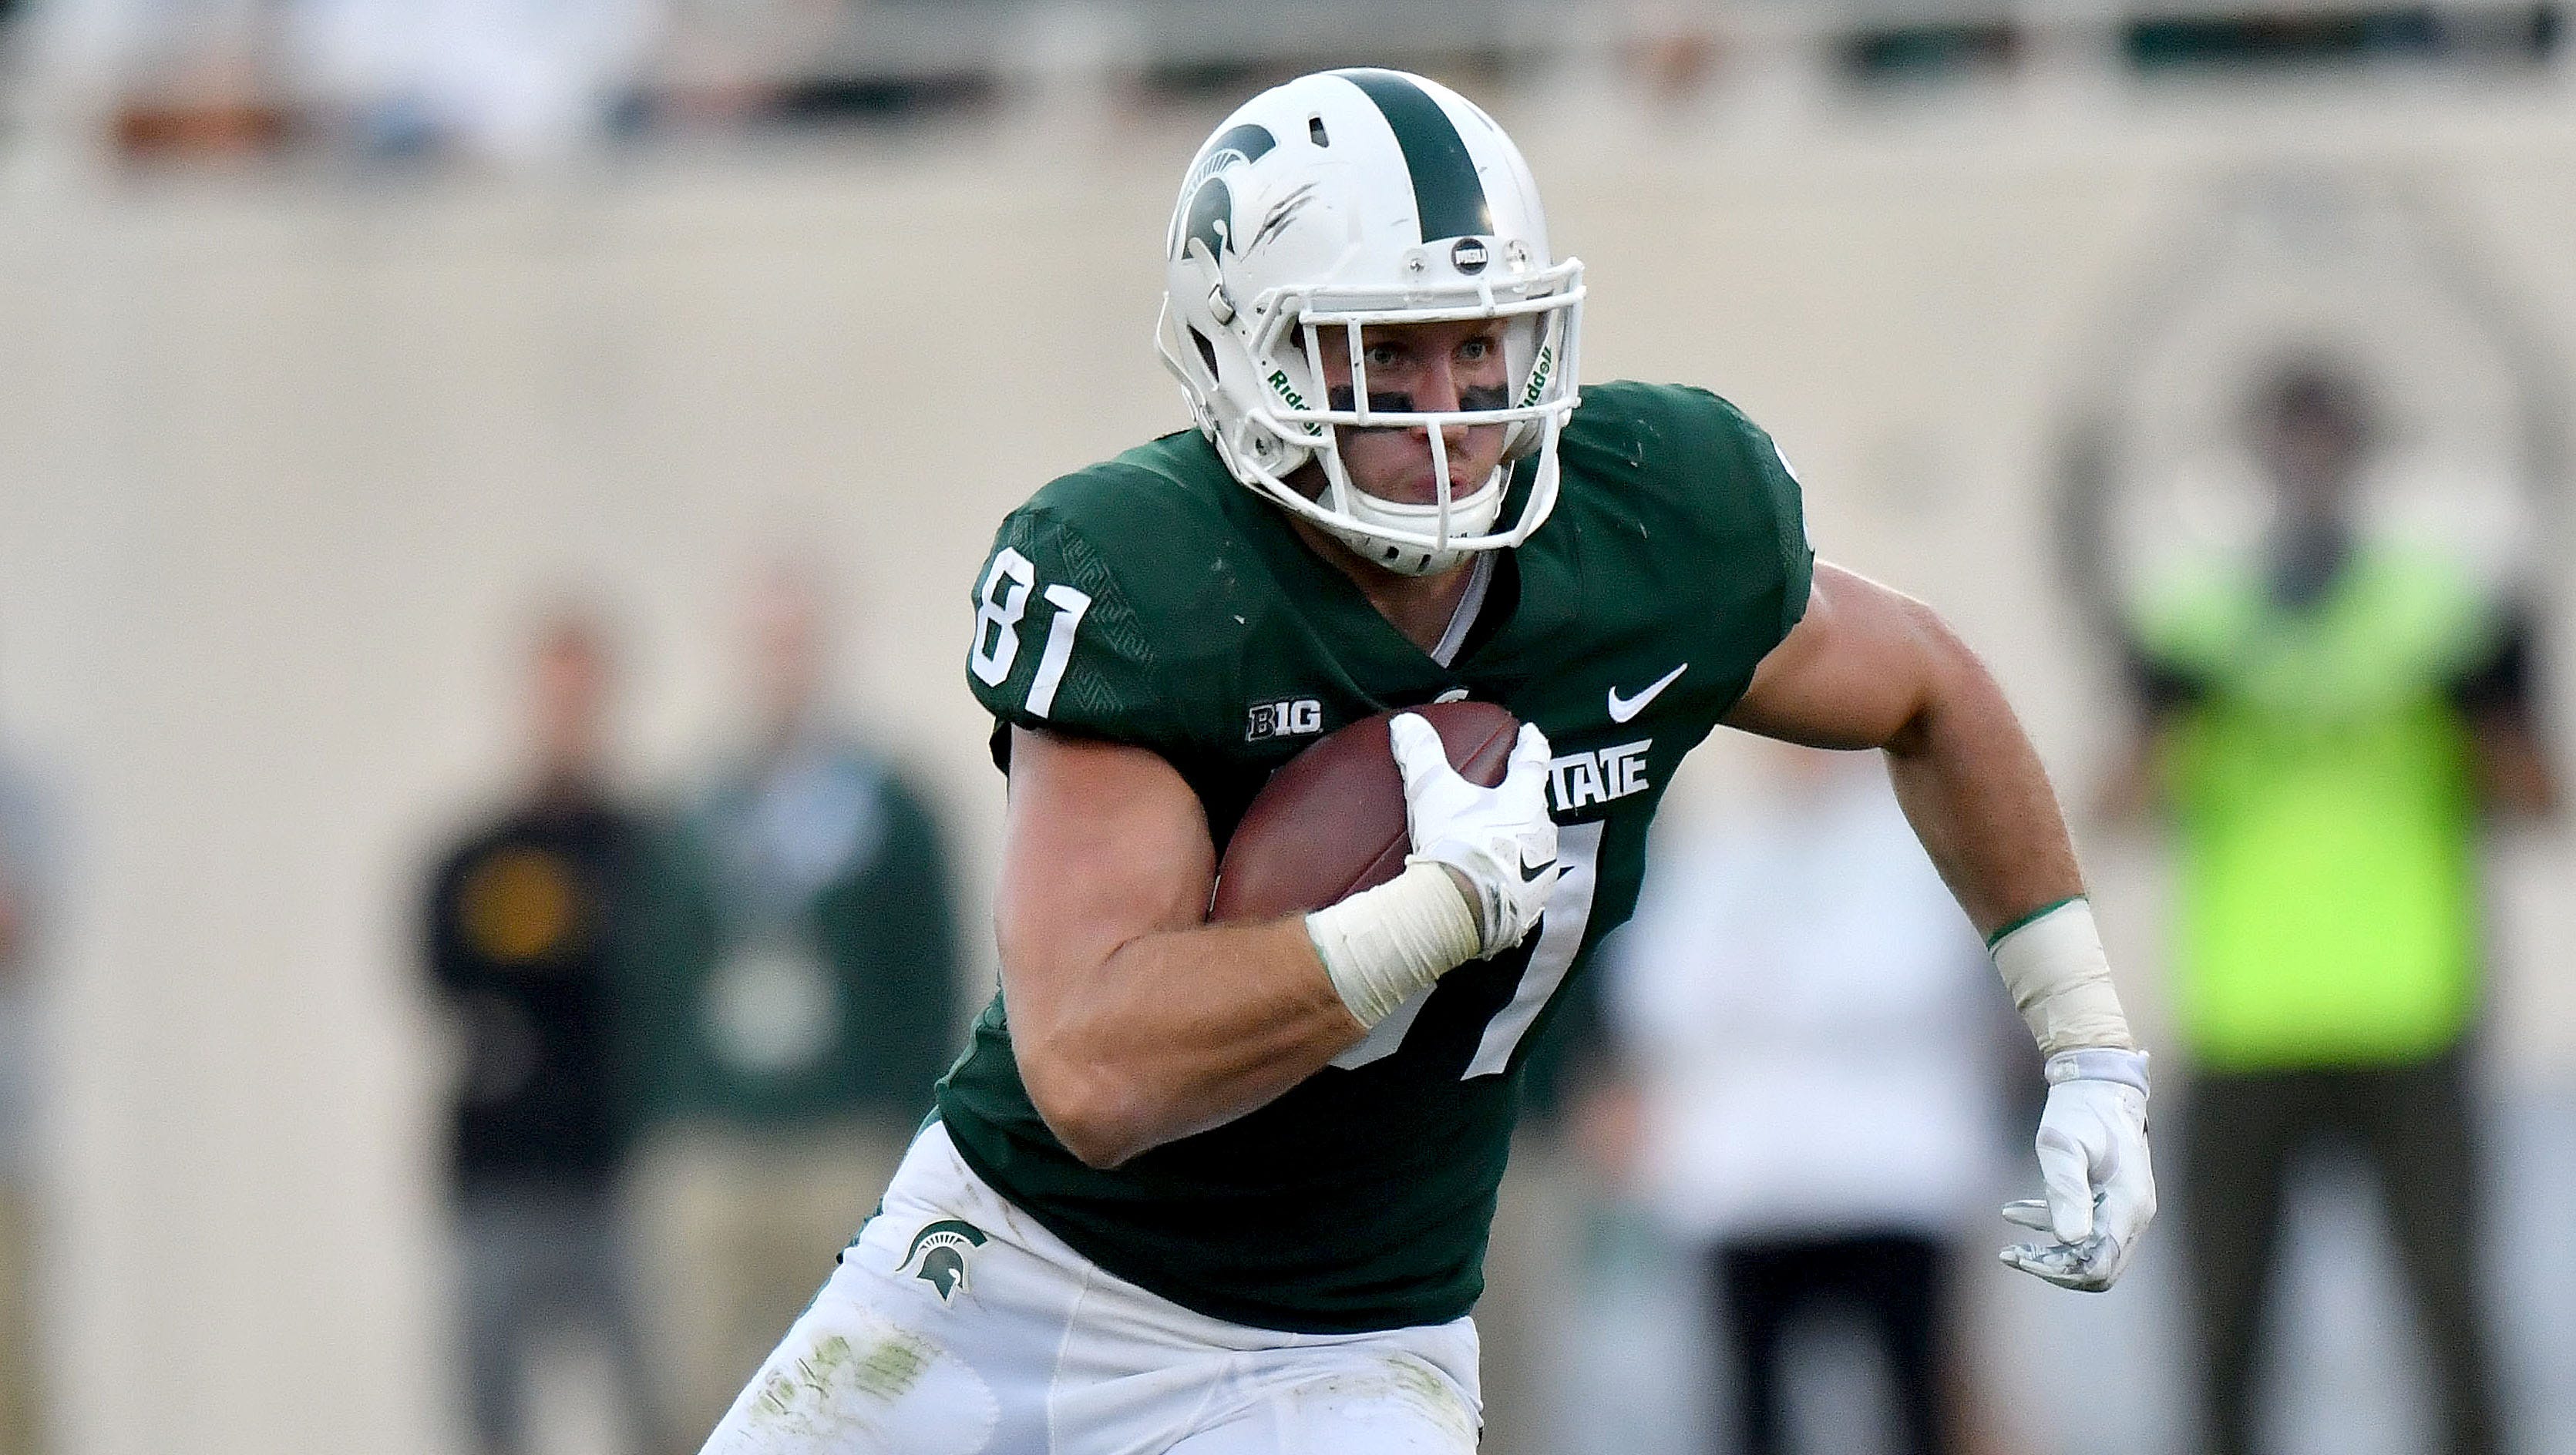 Tight end – Matt Sokol, Sr. Sokol was solid in his first season as a starter in 2017 and once again will be one of the Spartans’ top leaders and a factor in the passing game in 2018. Sophomore Matt Dotson should see increased playing time after seeing limited work as a true freshman in 2017. The health of sophomore Noah Davis will be a question heading into fall camp and could affect whether incoming freshman Trenton Gillison plays in his first season. Senior Chase Gianacakos will continue to be used in the jumbo, short-yardage packages.